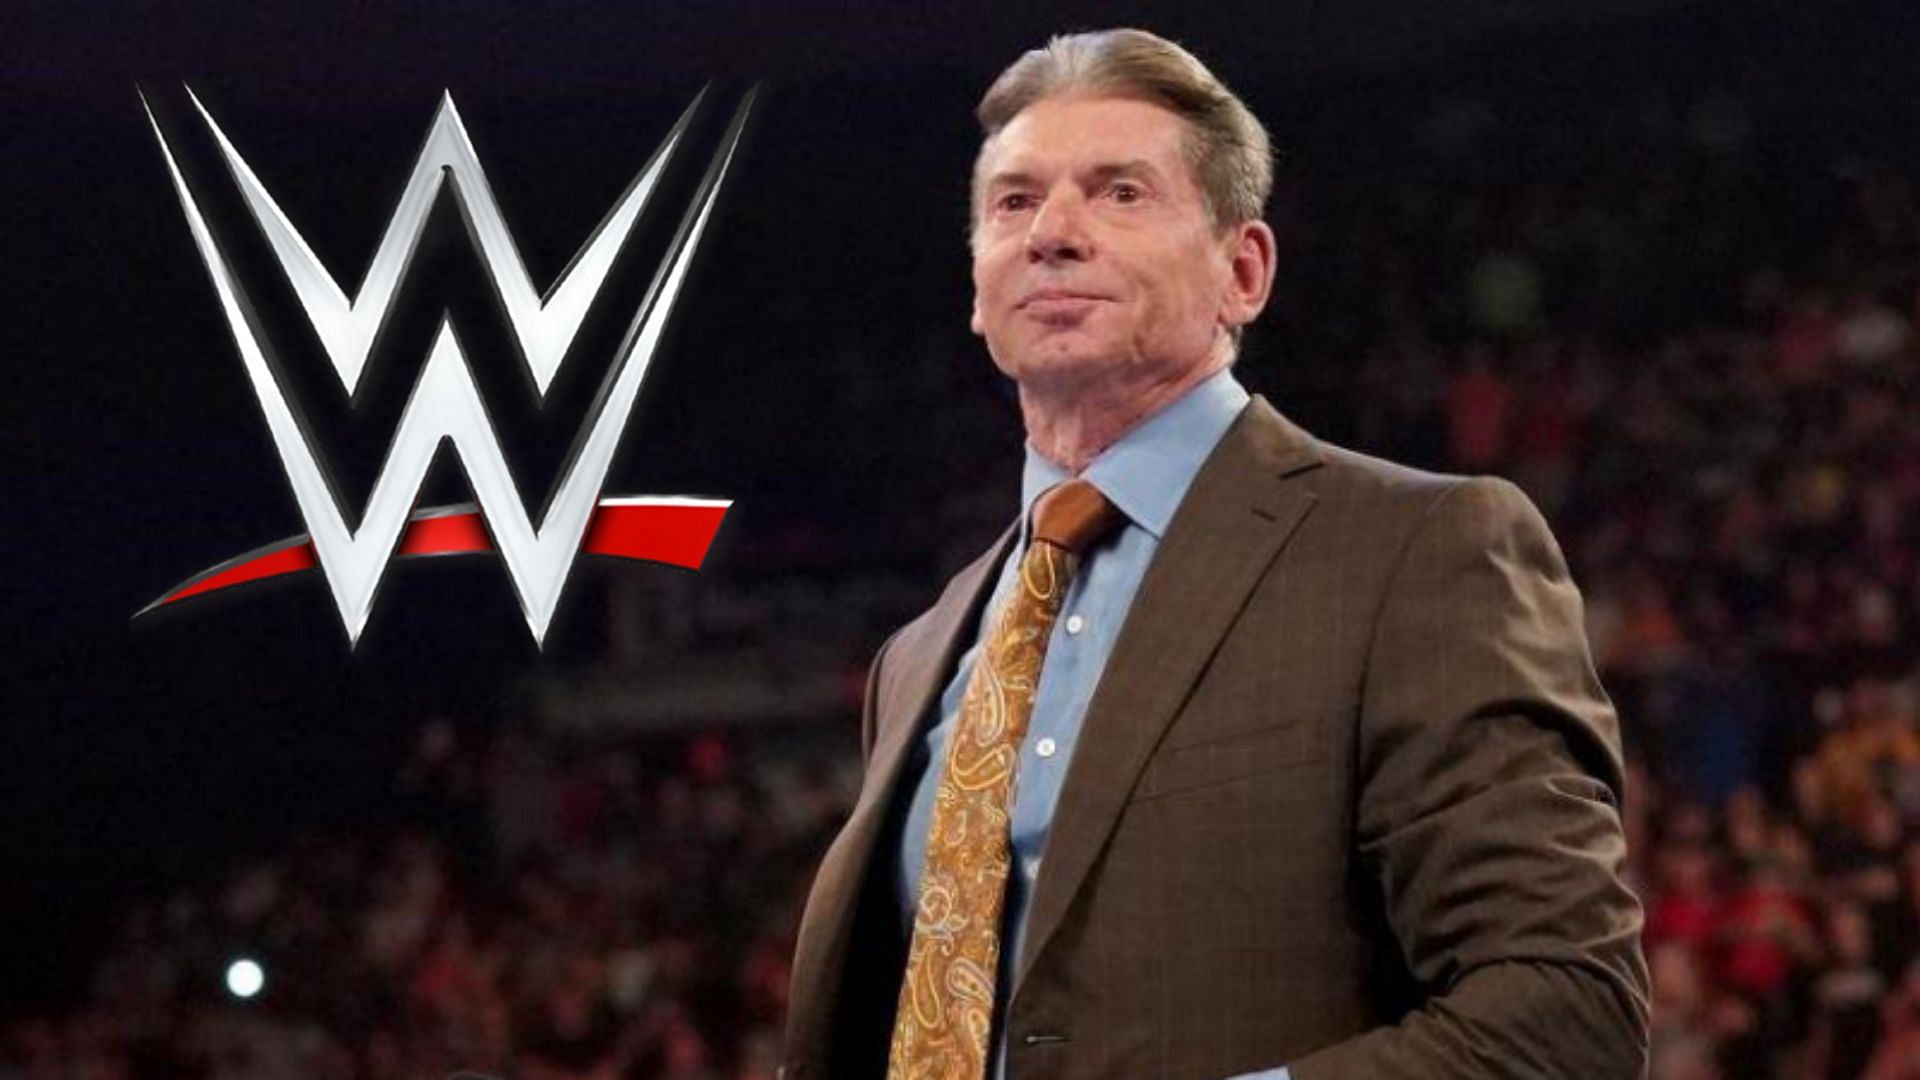 Vince McMahon is no longer the CEO of WWE